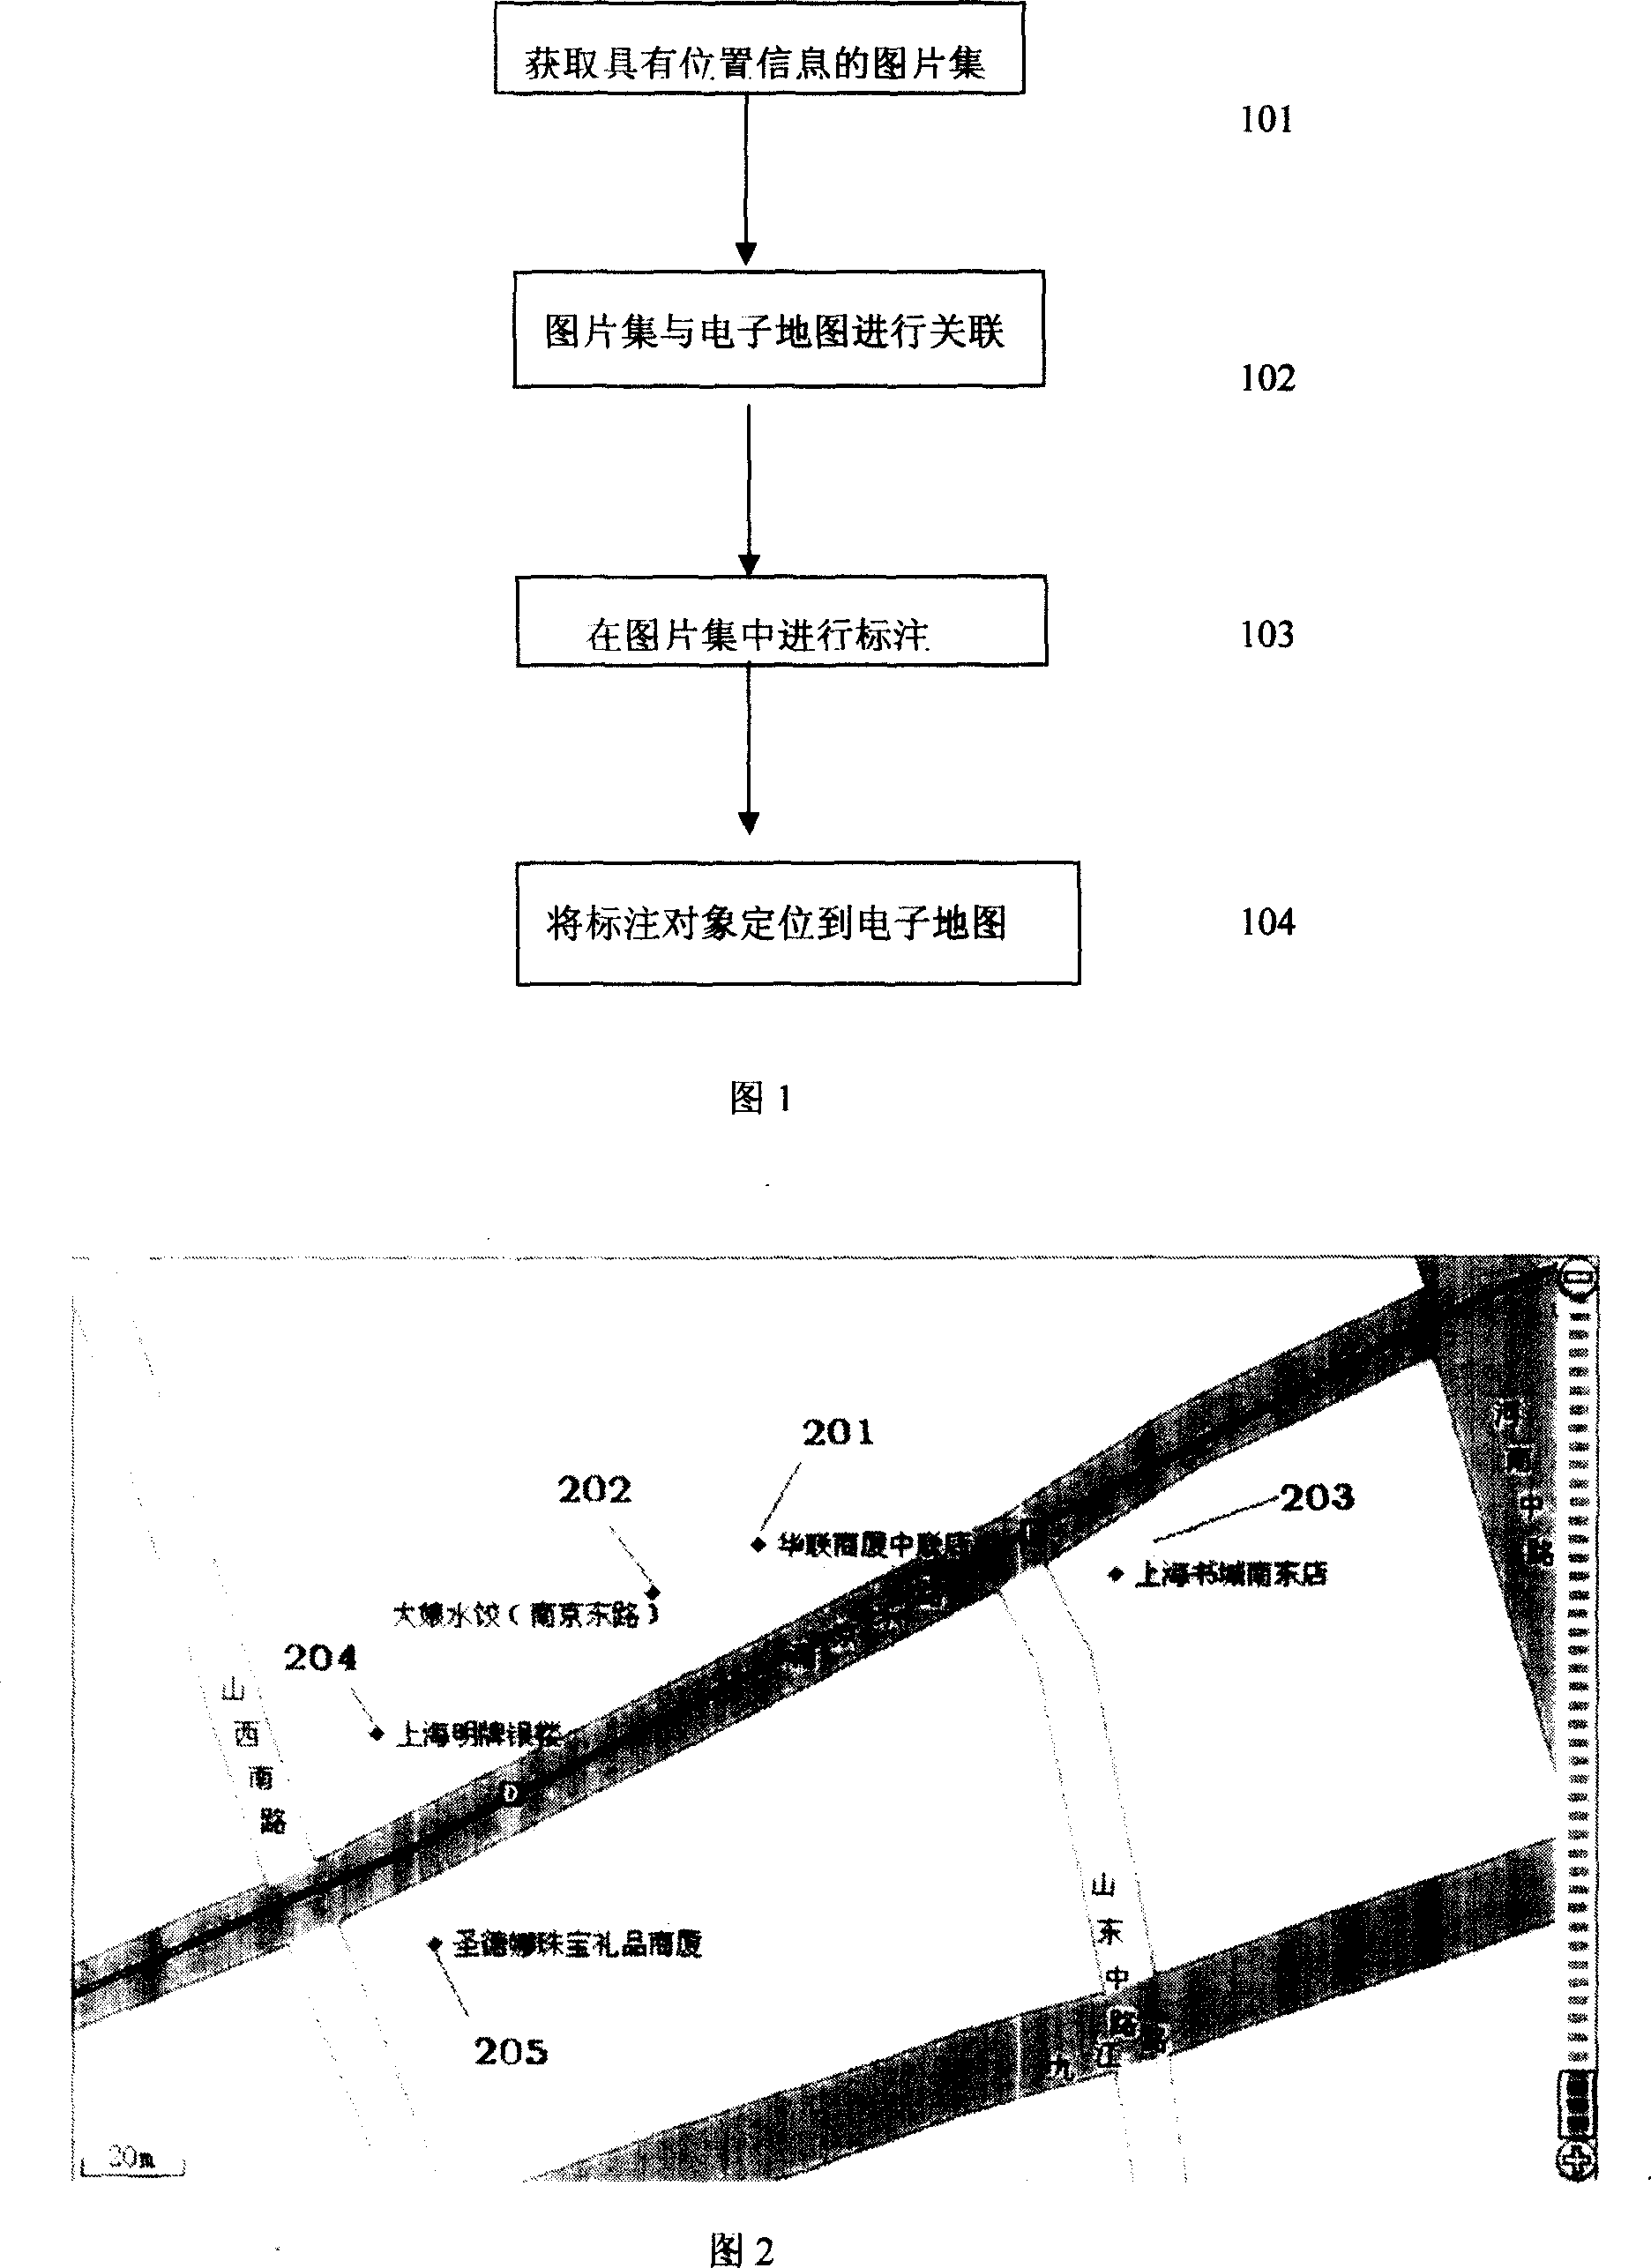 Method for annotating electronic map through photograph collection having position information